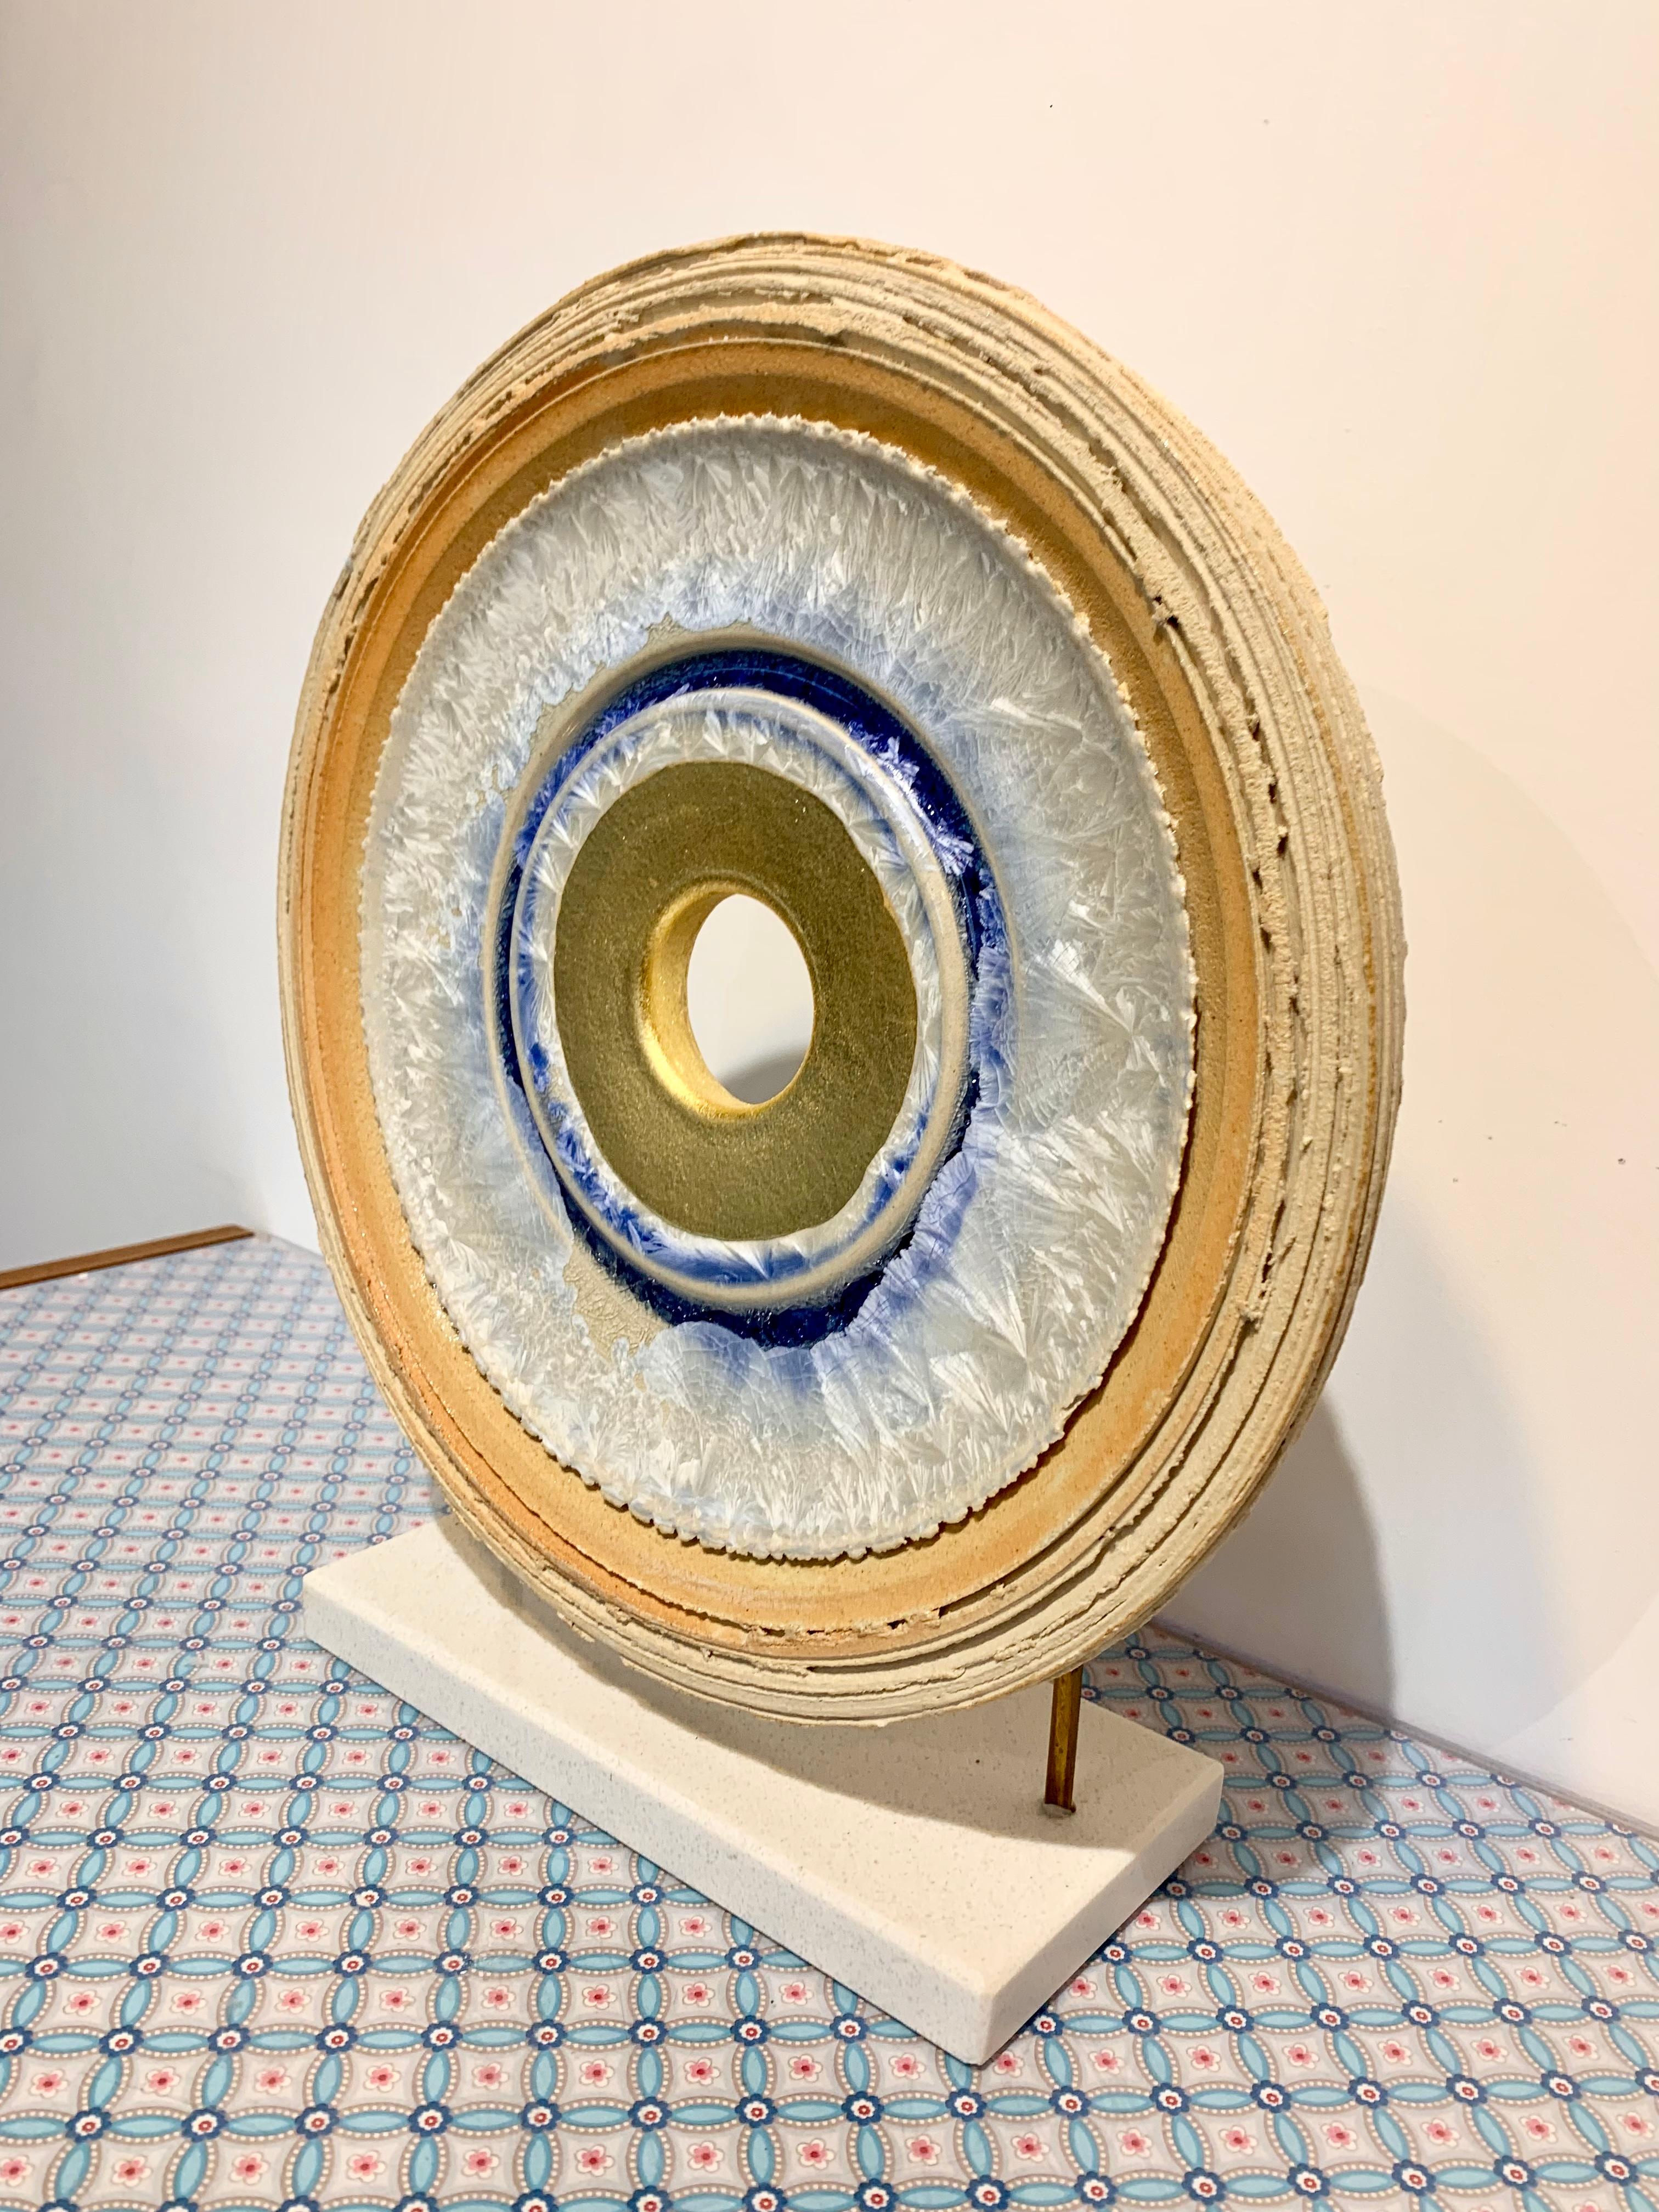 Ice Blue Creatio Continua by Kuno Vollet - gold, blue circular ceramic sculpture For Sale 5